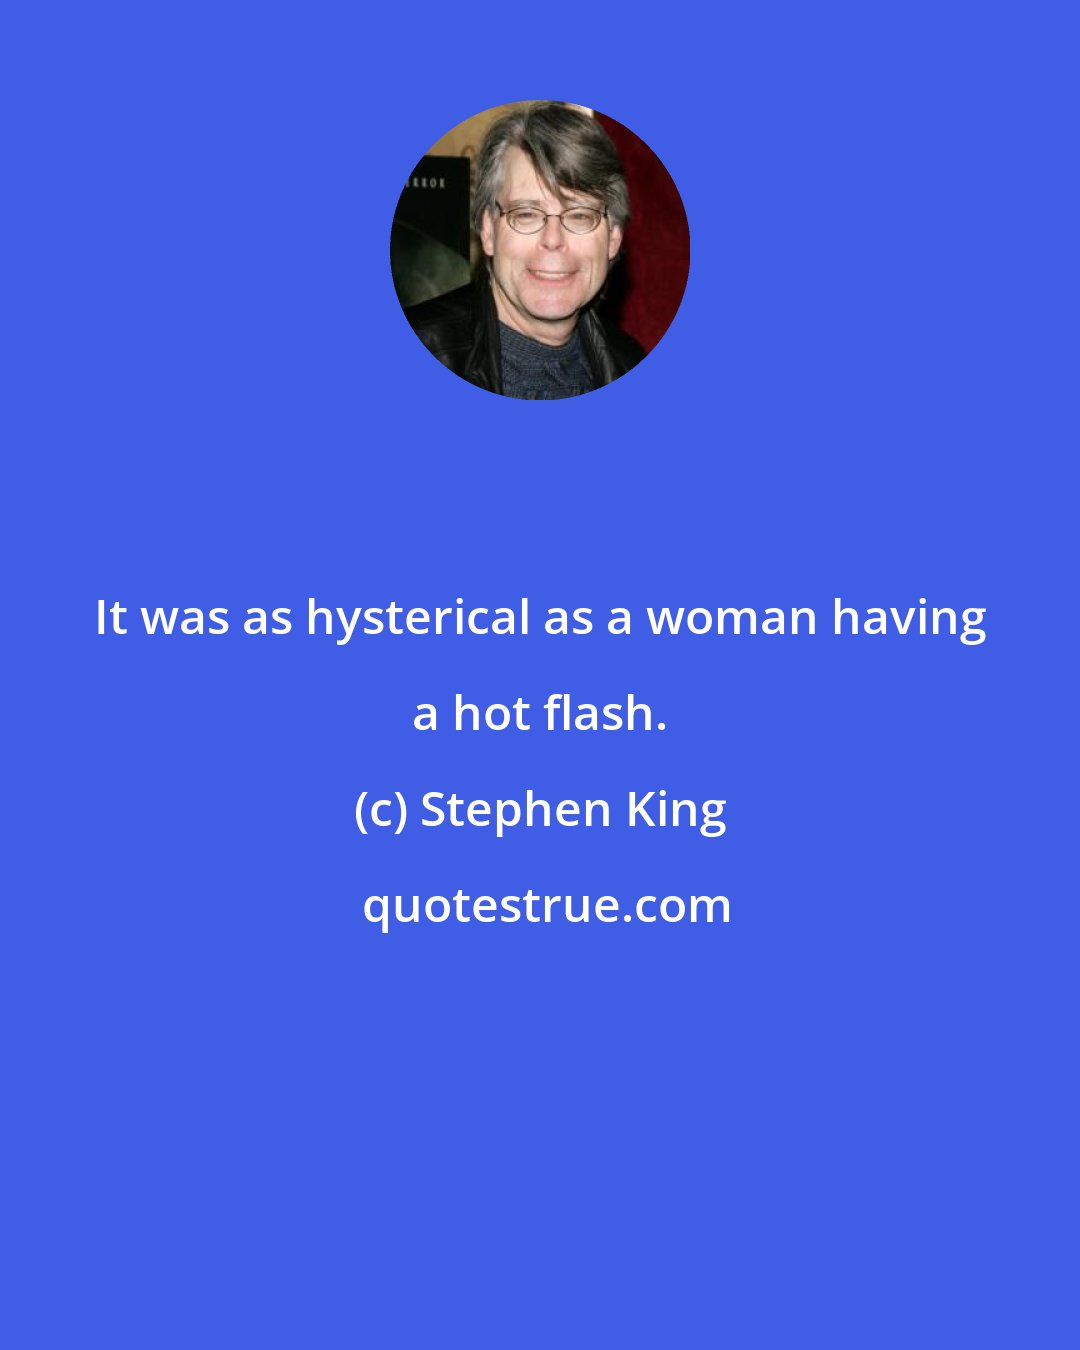 Stephen King: It was as hysterical as a woman having a hot flash.